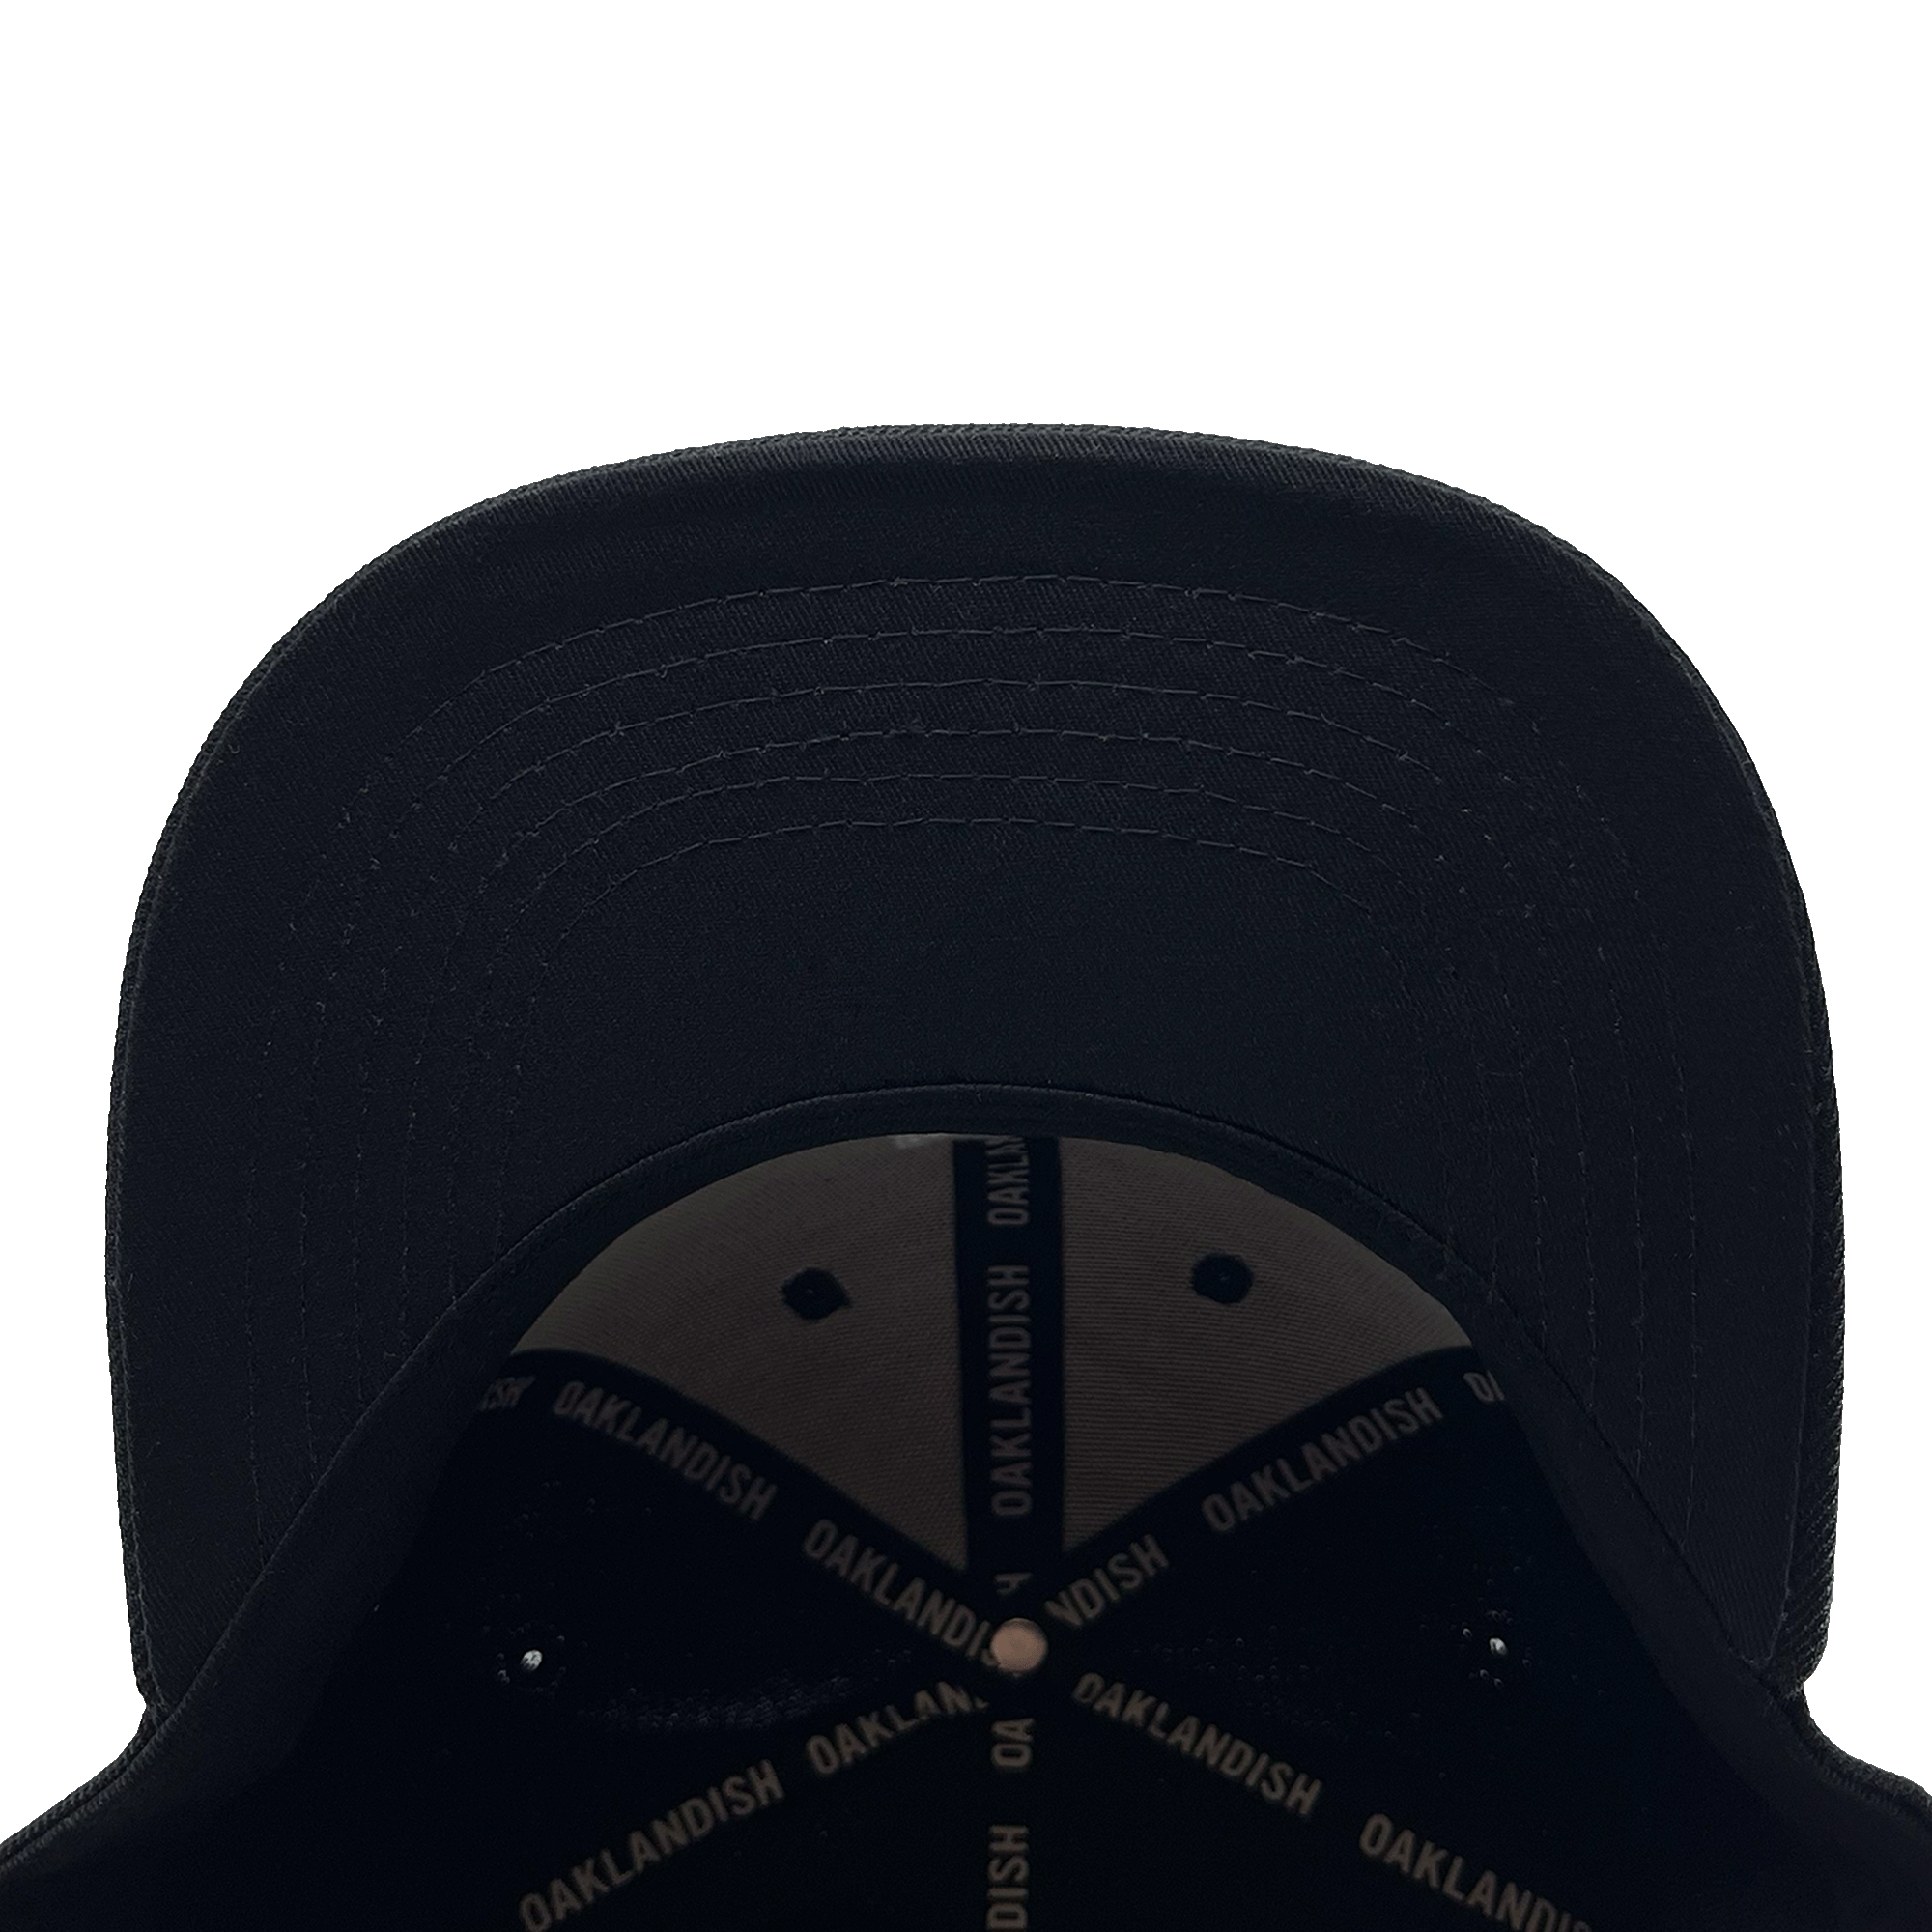 View of the underside of the bill of a black cap with black striping with Oaklandish wordmark on repeat inside the crown.